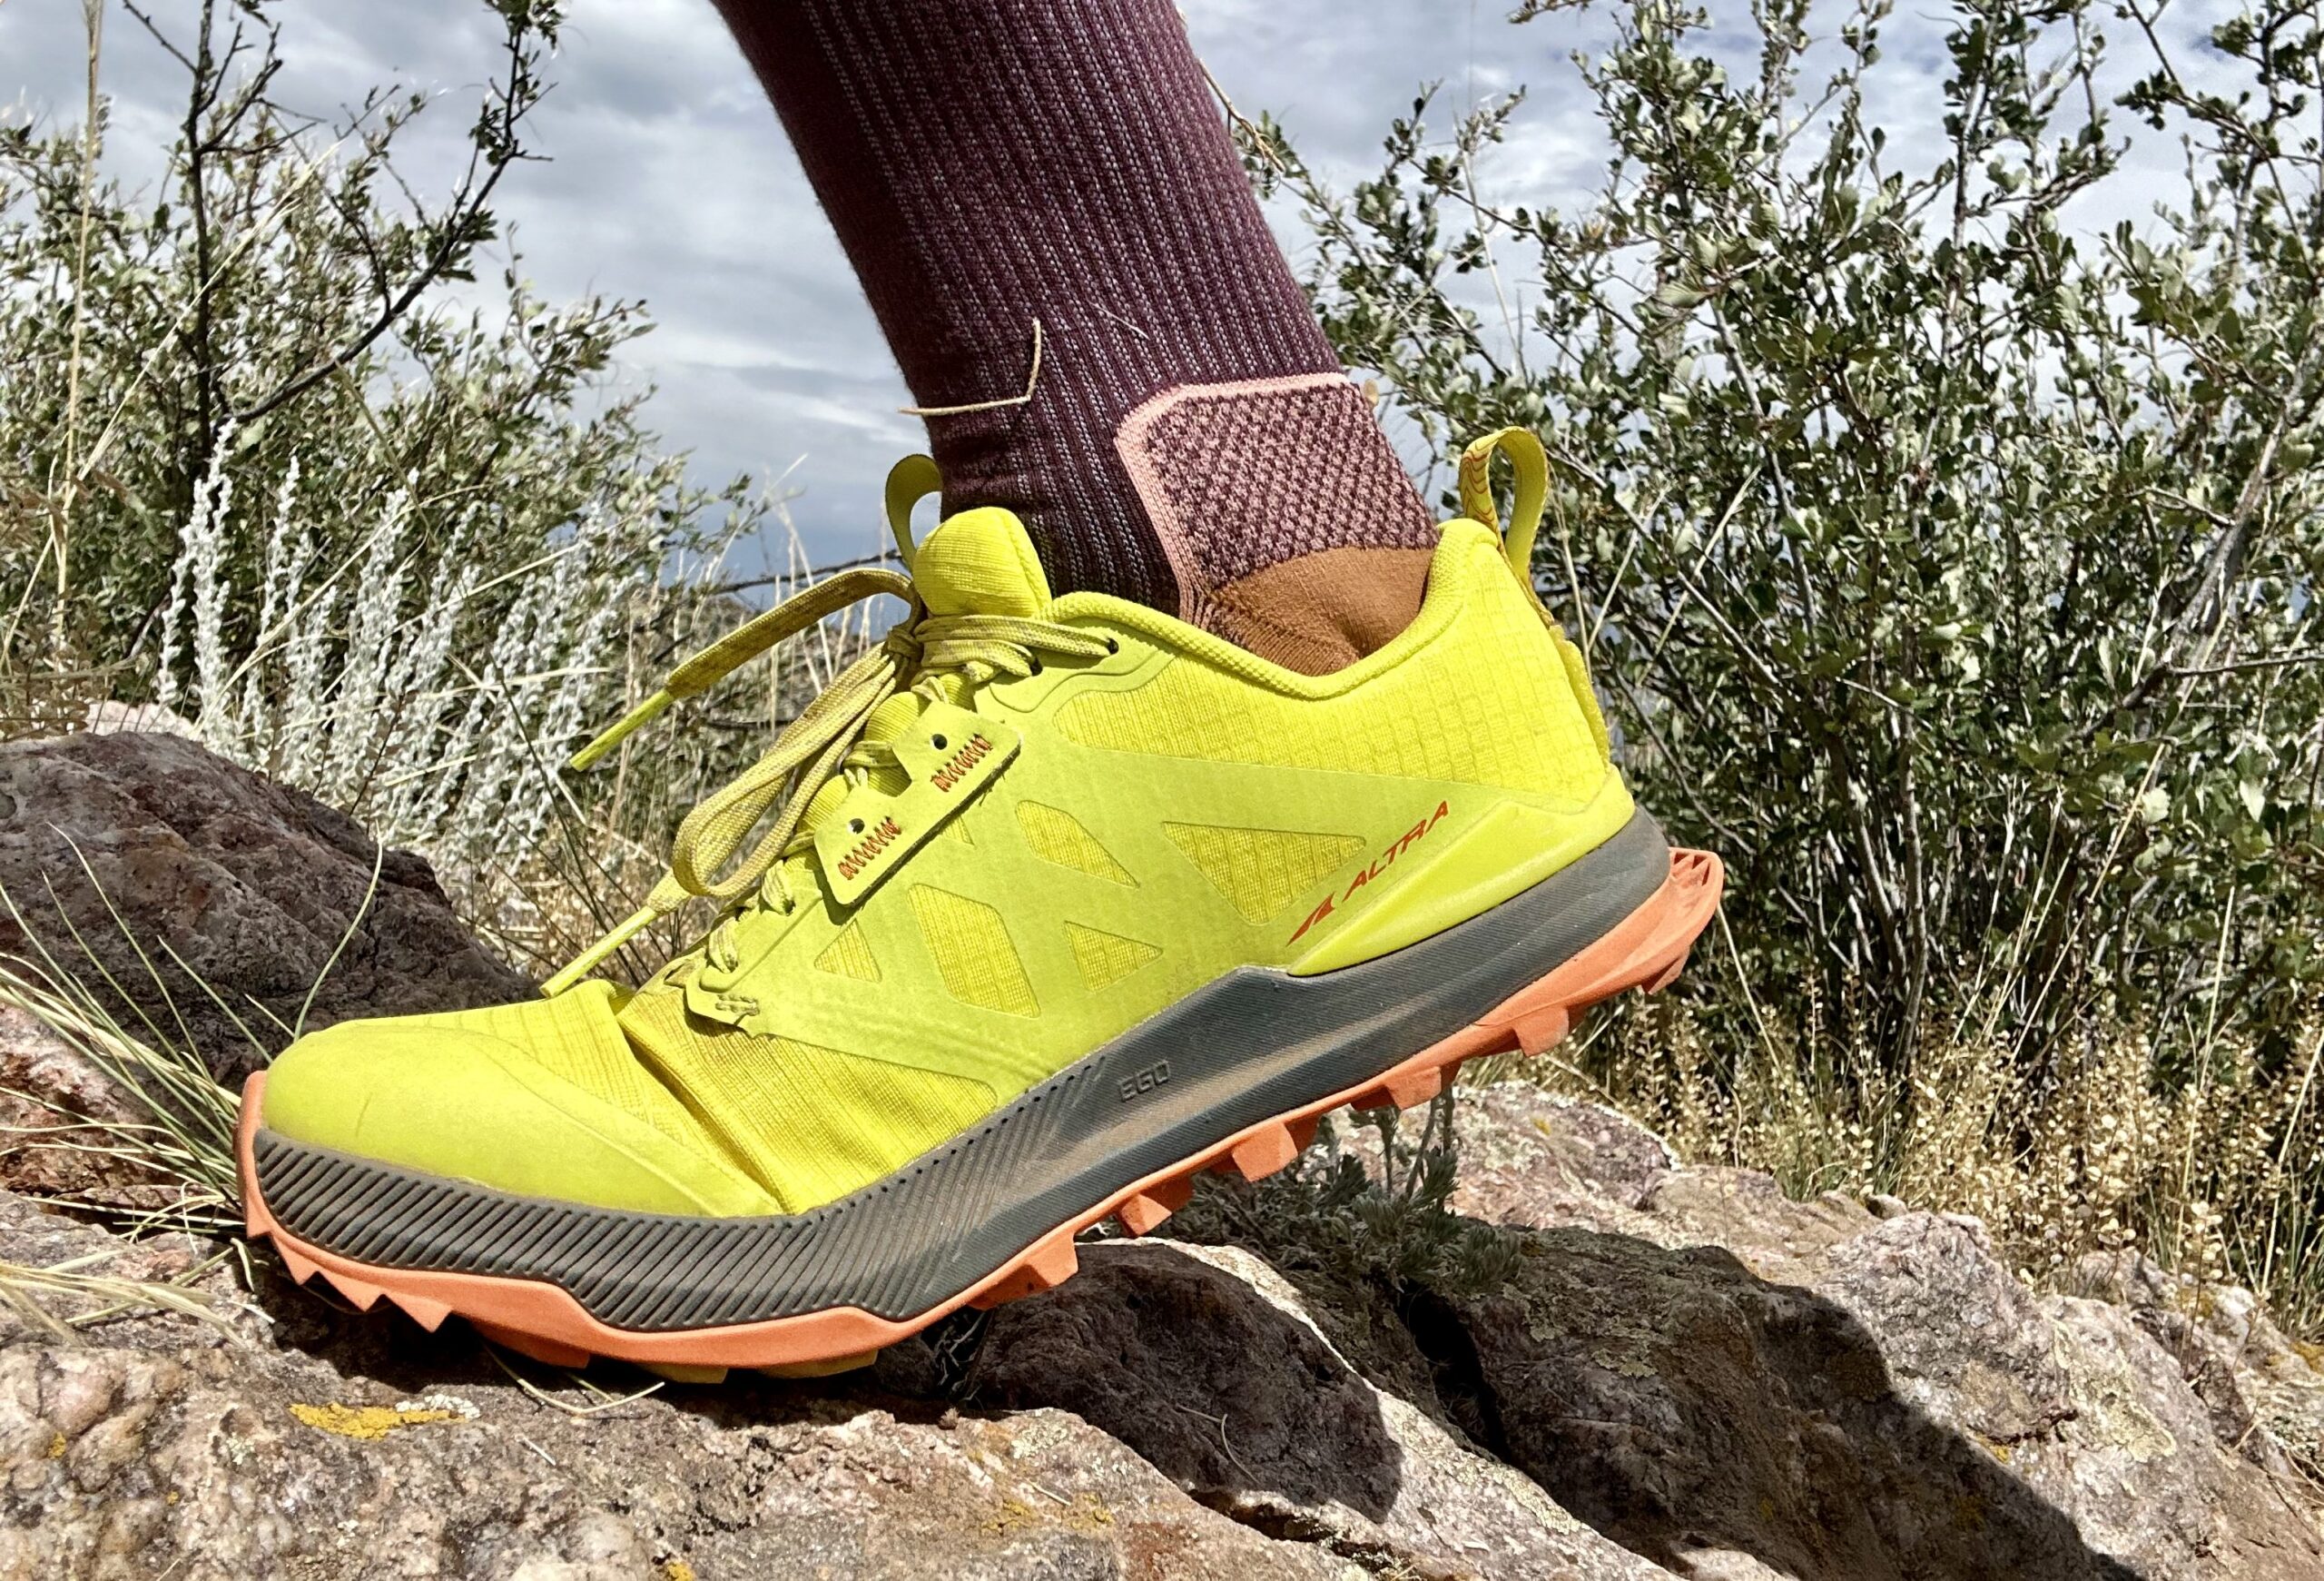 A side profile shot of a hiker from the ankles down wearing trail runners in a desert setting.